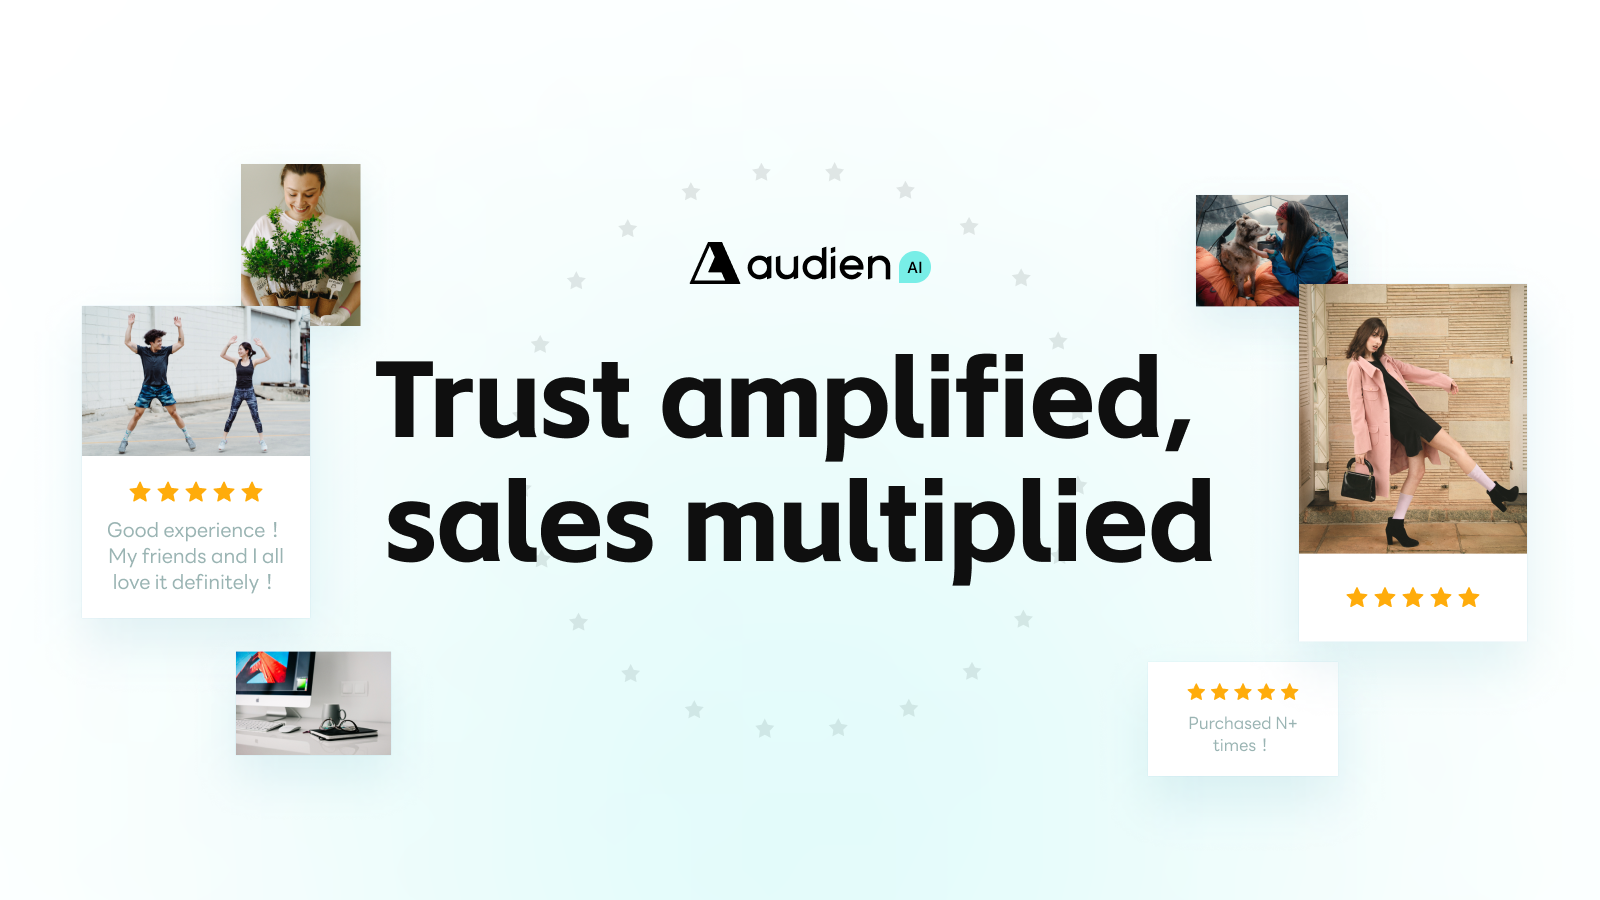 Product Review App by Audien helps amplify store trust and sales